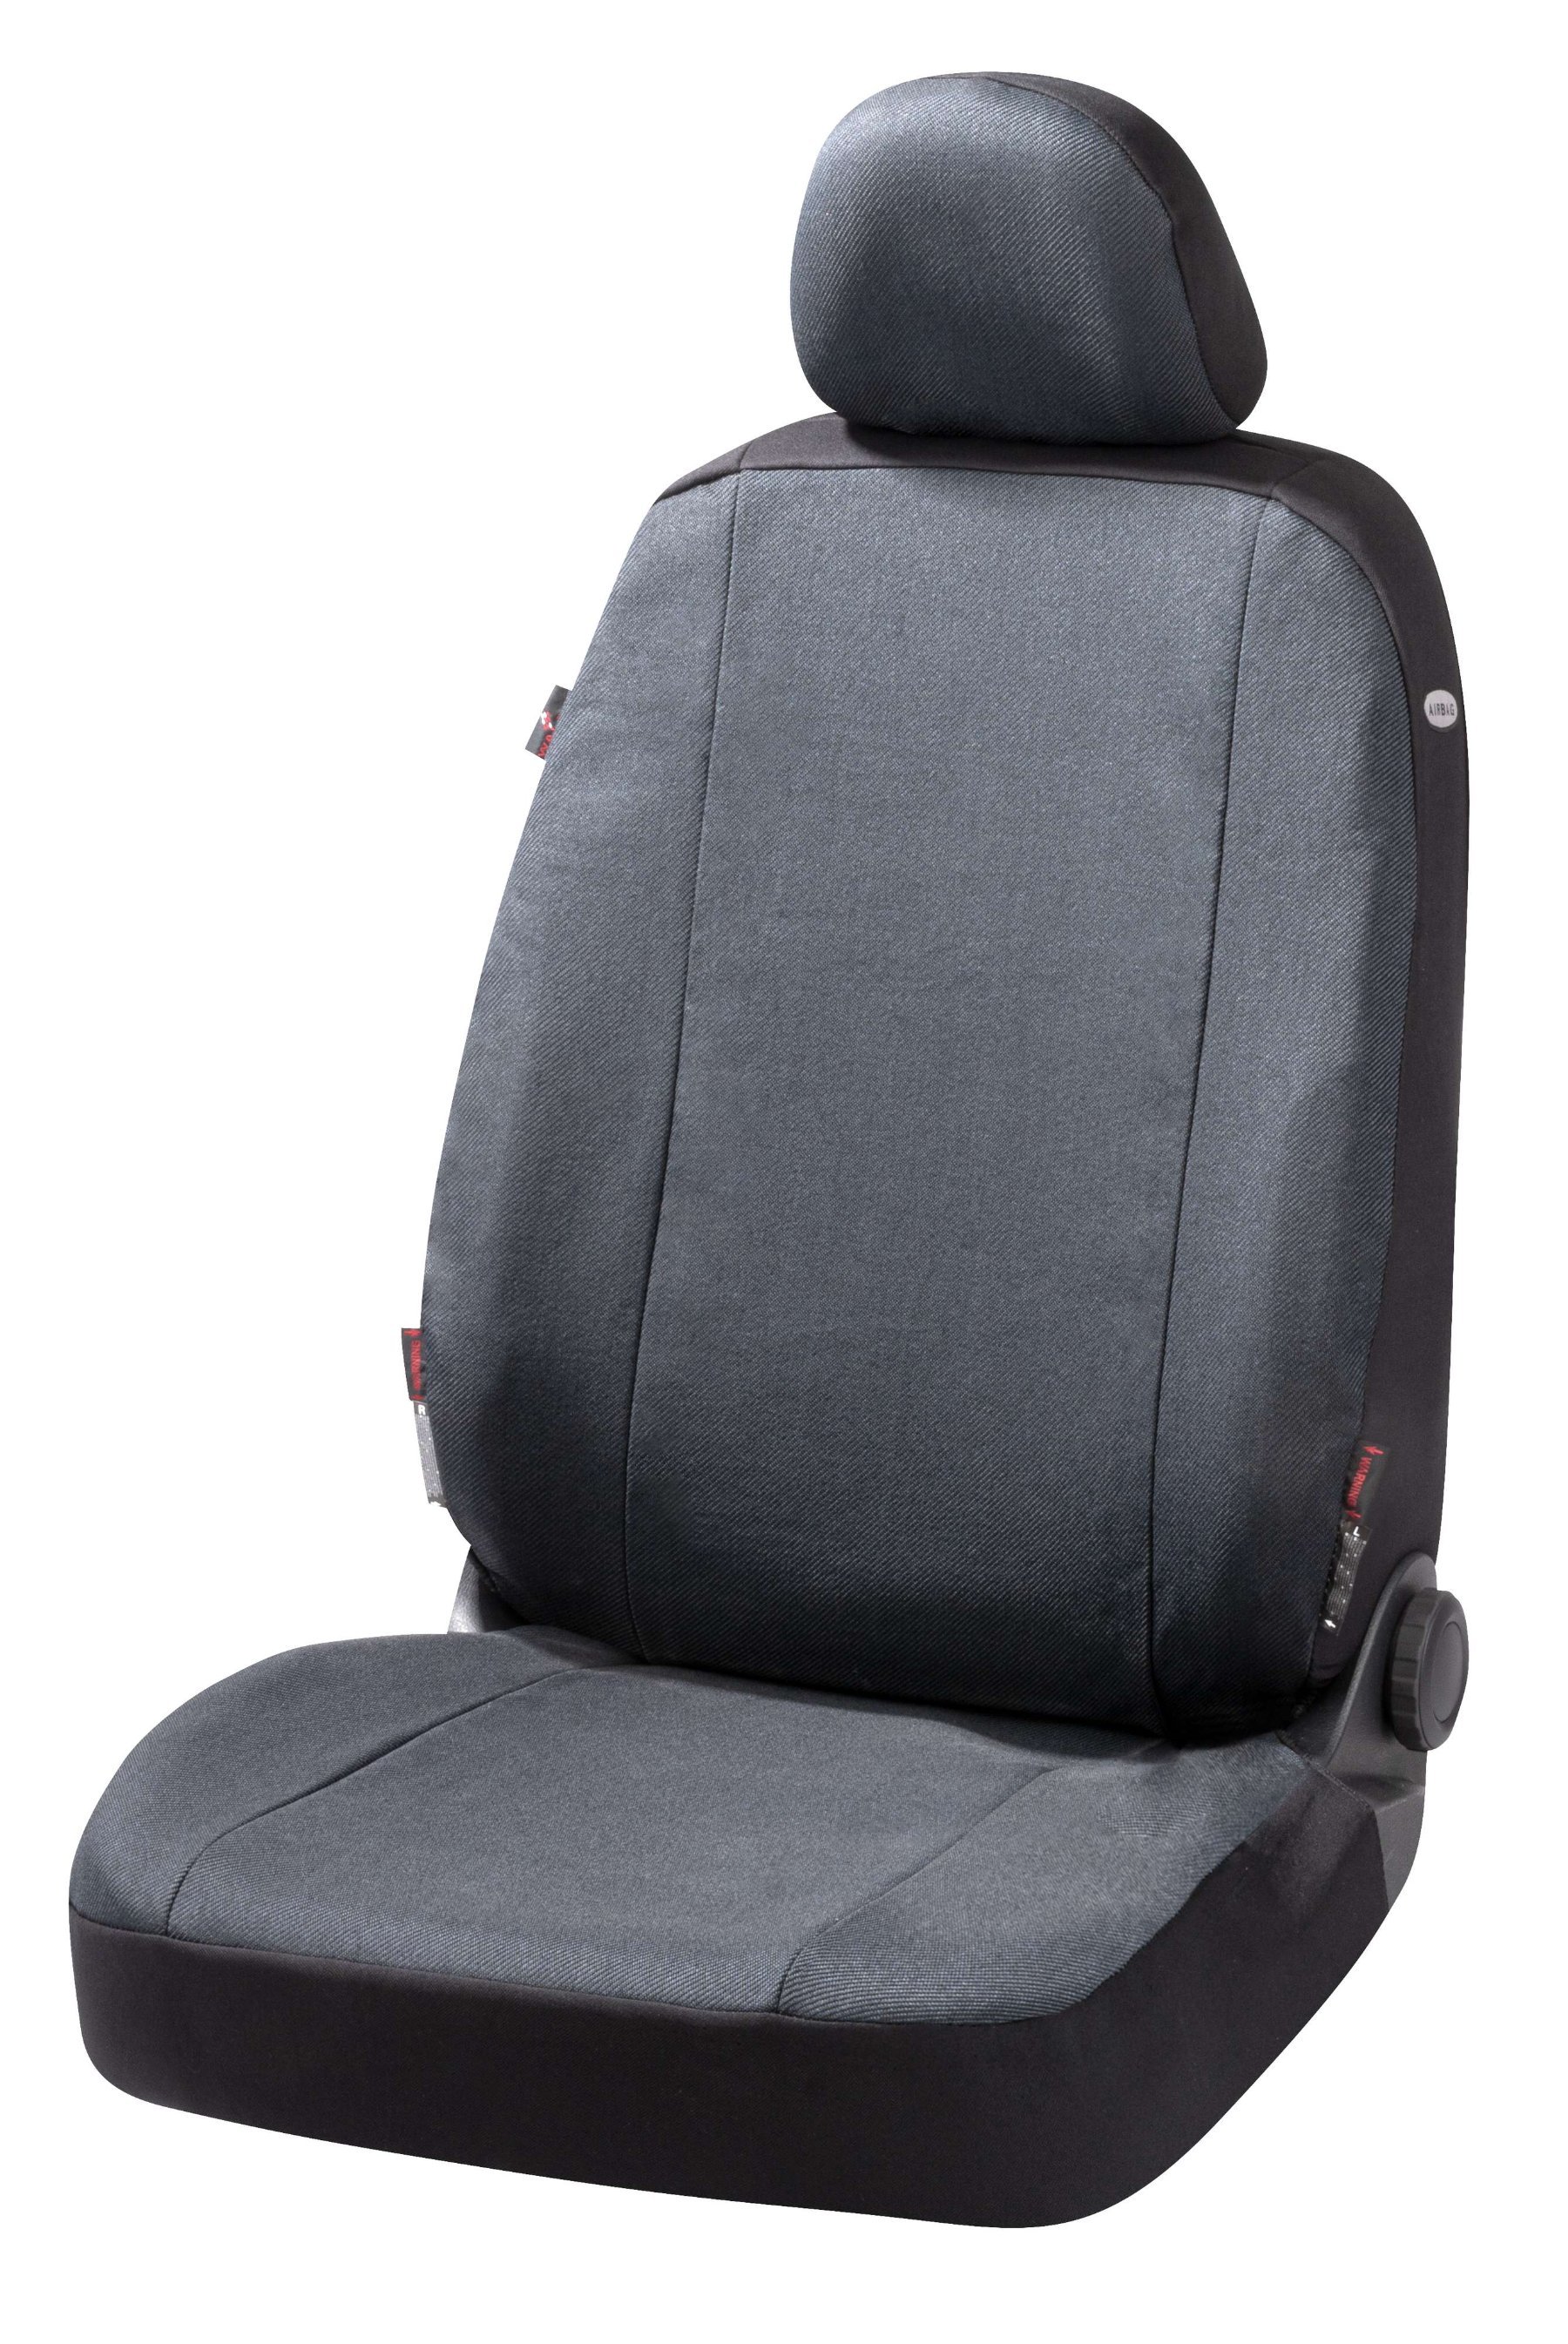 Car seat cover Toronto, car seat cover single seat, universal seat cover anthracite